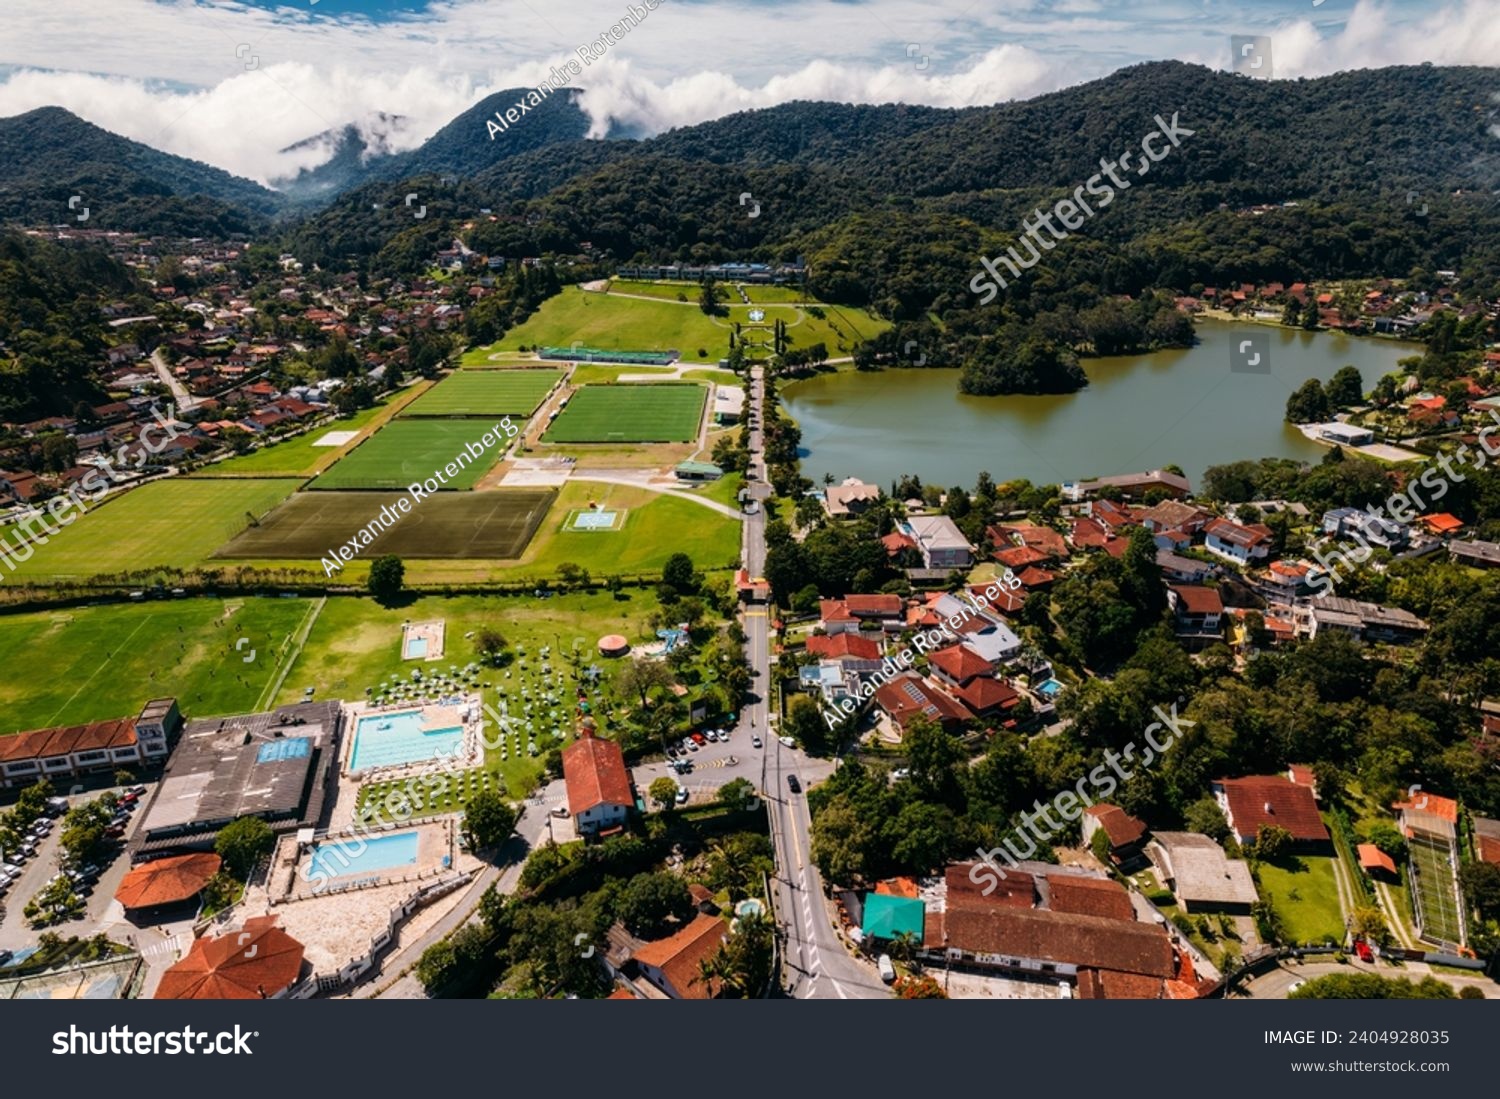 Aerial drone view of the city of Granja Comary in Teresopolis, the headquarters and main training center of the Brazil national football team #2404928035